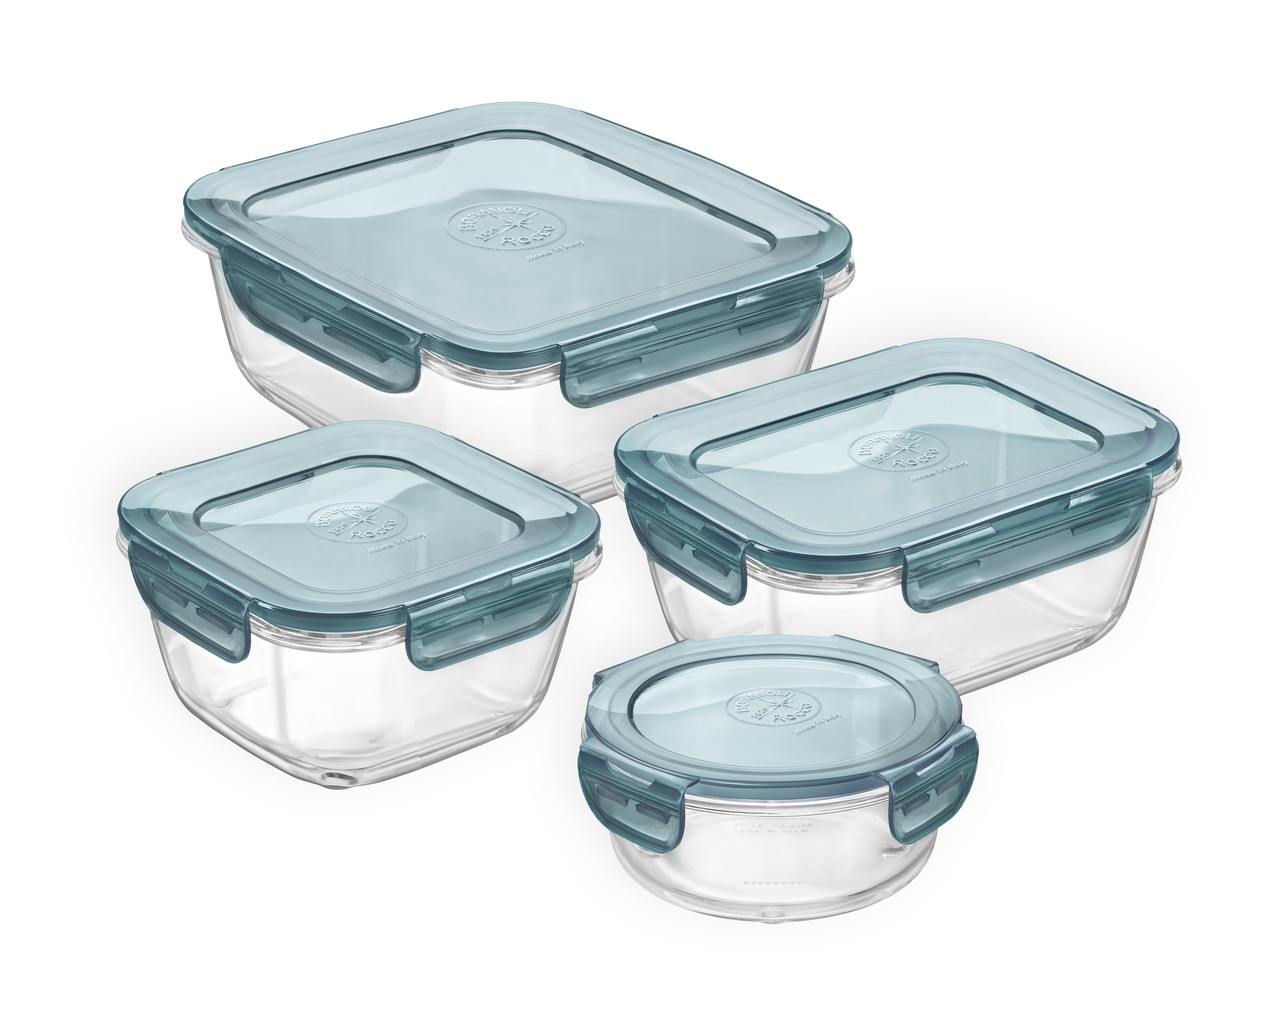 Frigoverre Evolution 25.25 oz. Square Tall Food Storage Container, Gray Lid  (Set of 12)